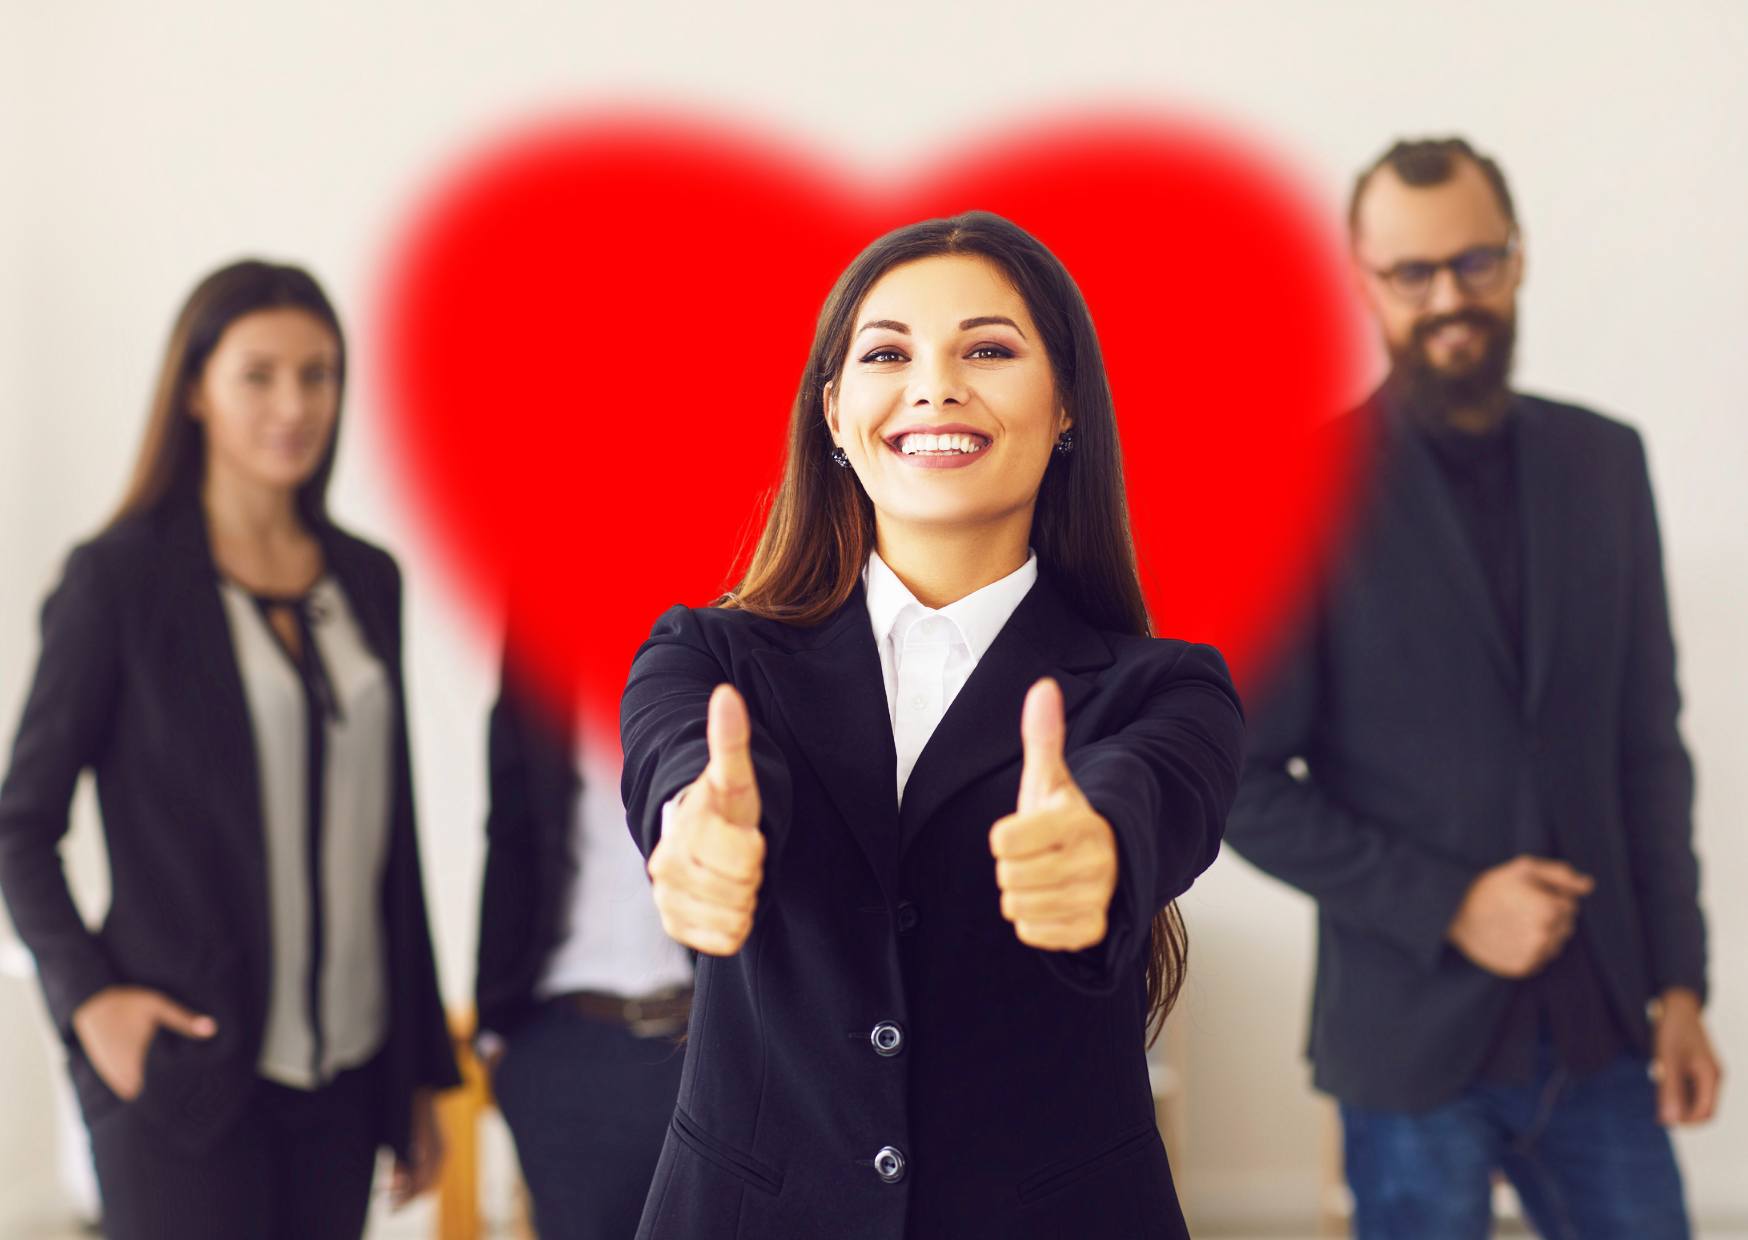 happy-lady-at-work-with-her-thumbs-up-and-a-heart-shape-behind-her-and-male-and-female-work-colleague